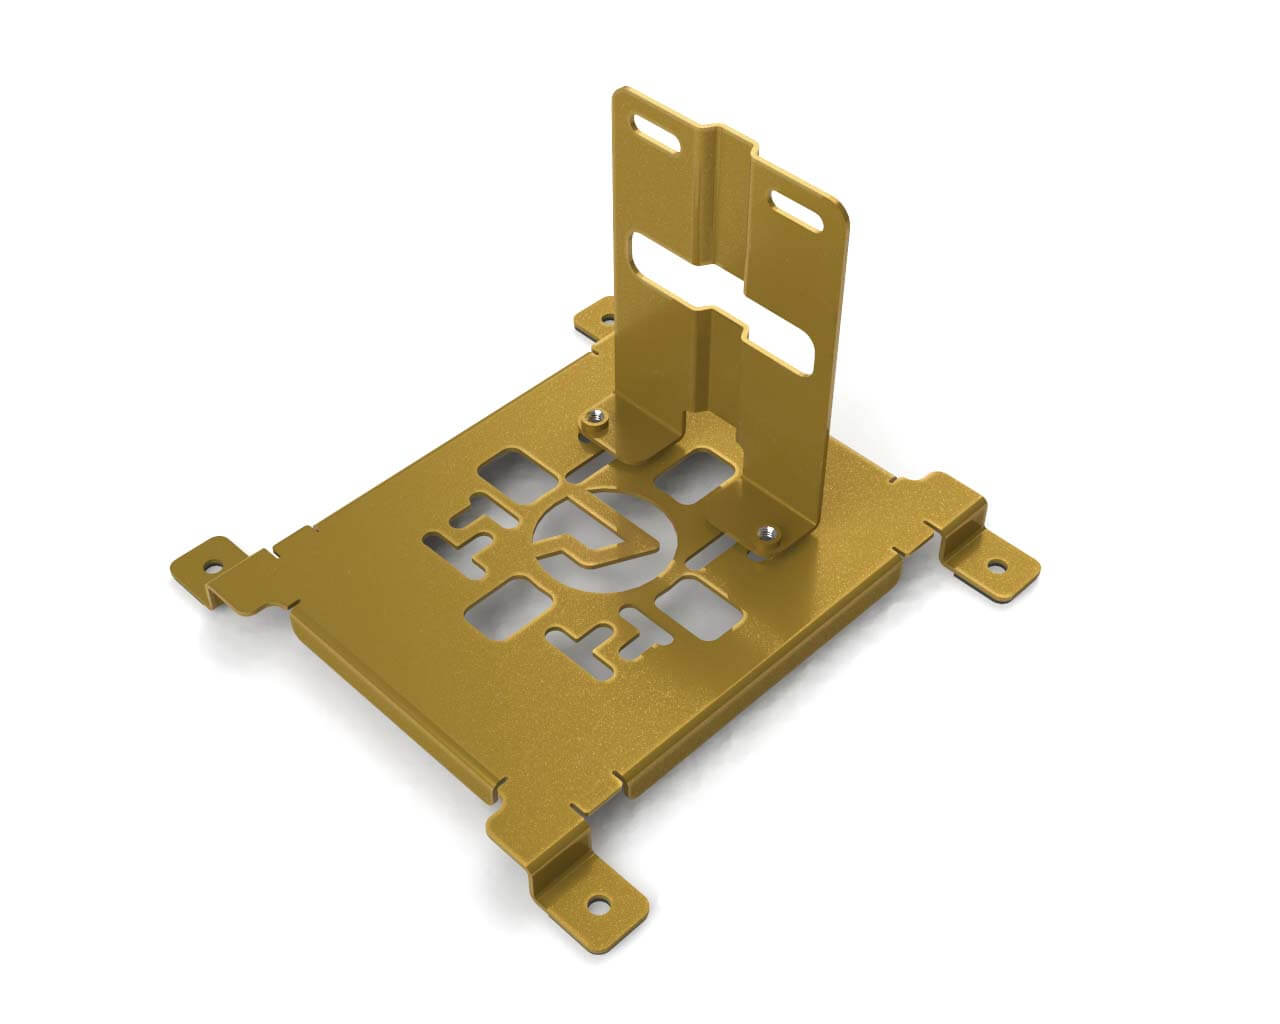 PrimoChill SX CTR2 Spider Mount Bracket Kit - 140mm Series - PrimoChill - KEEPING IT COOL Gold